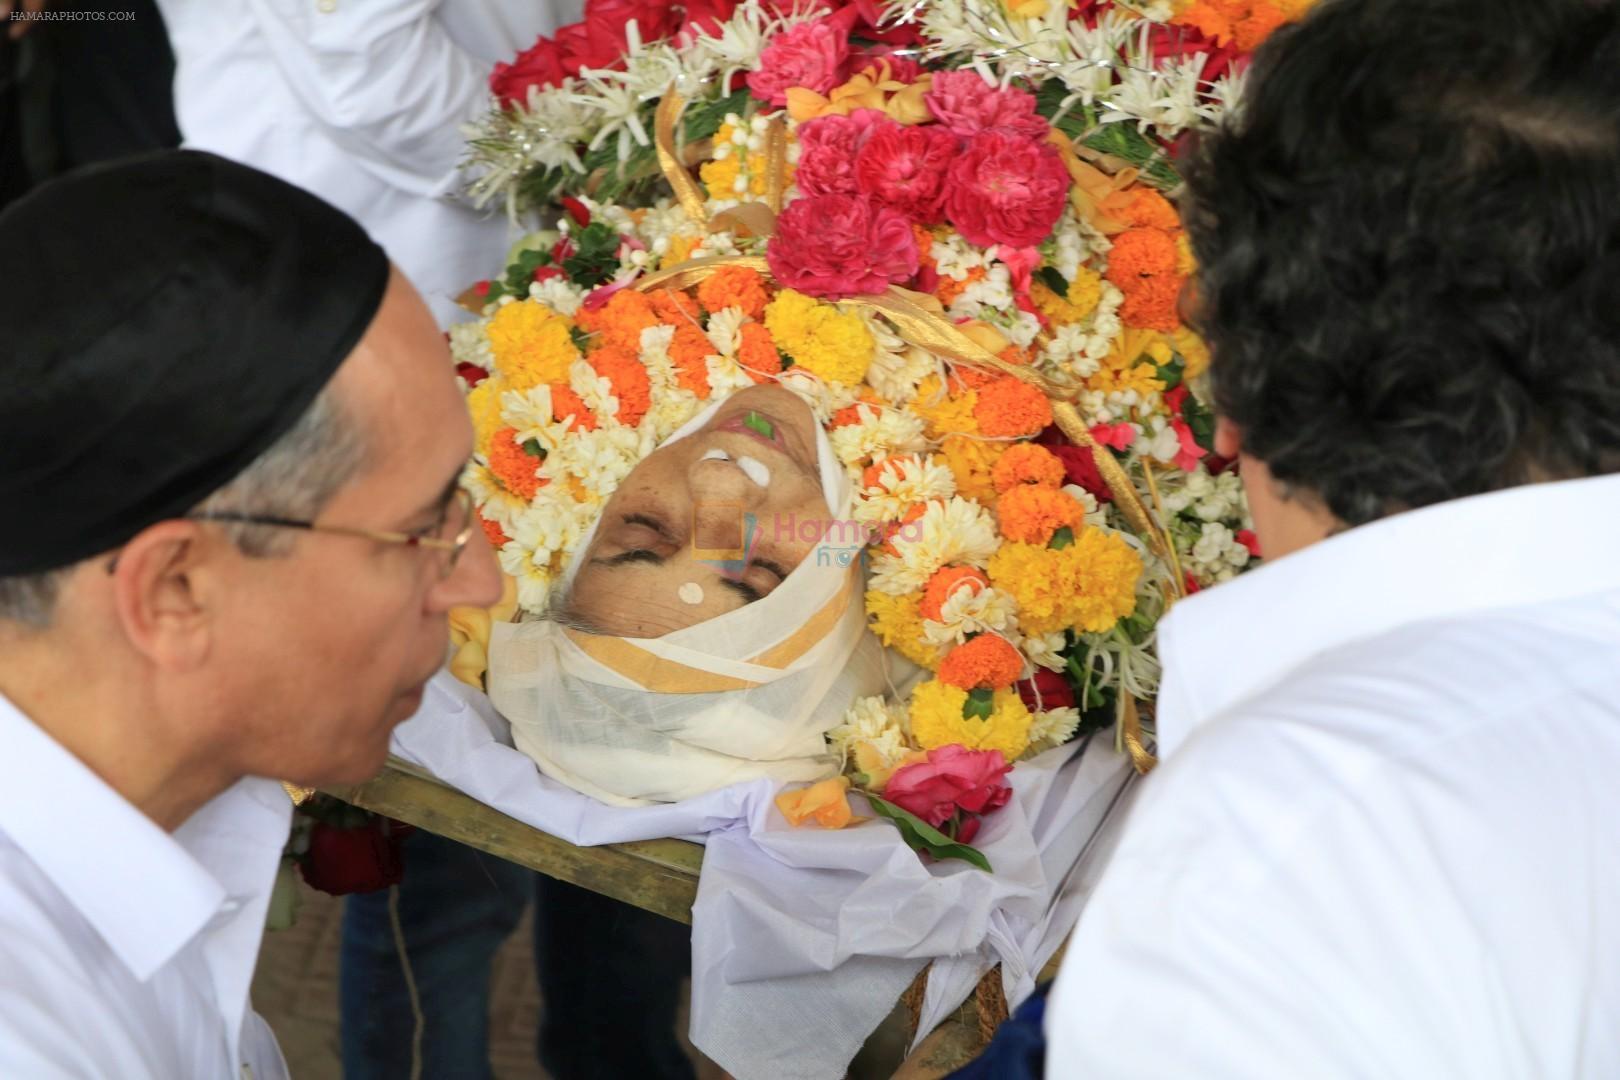 At Actress Shammi Funeral on 6th March 2018